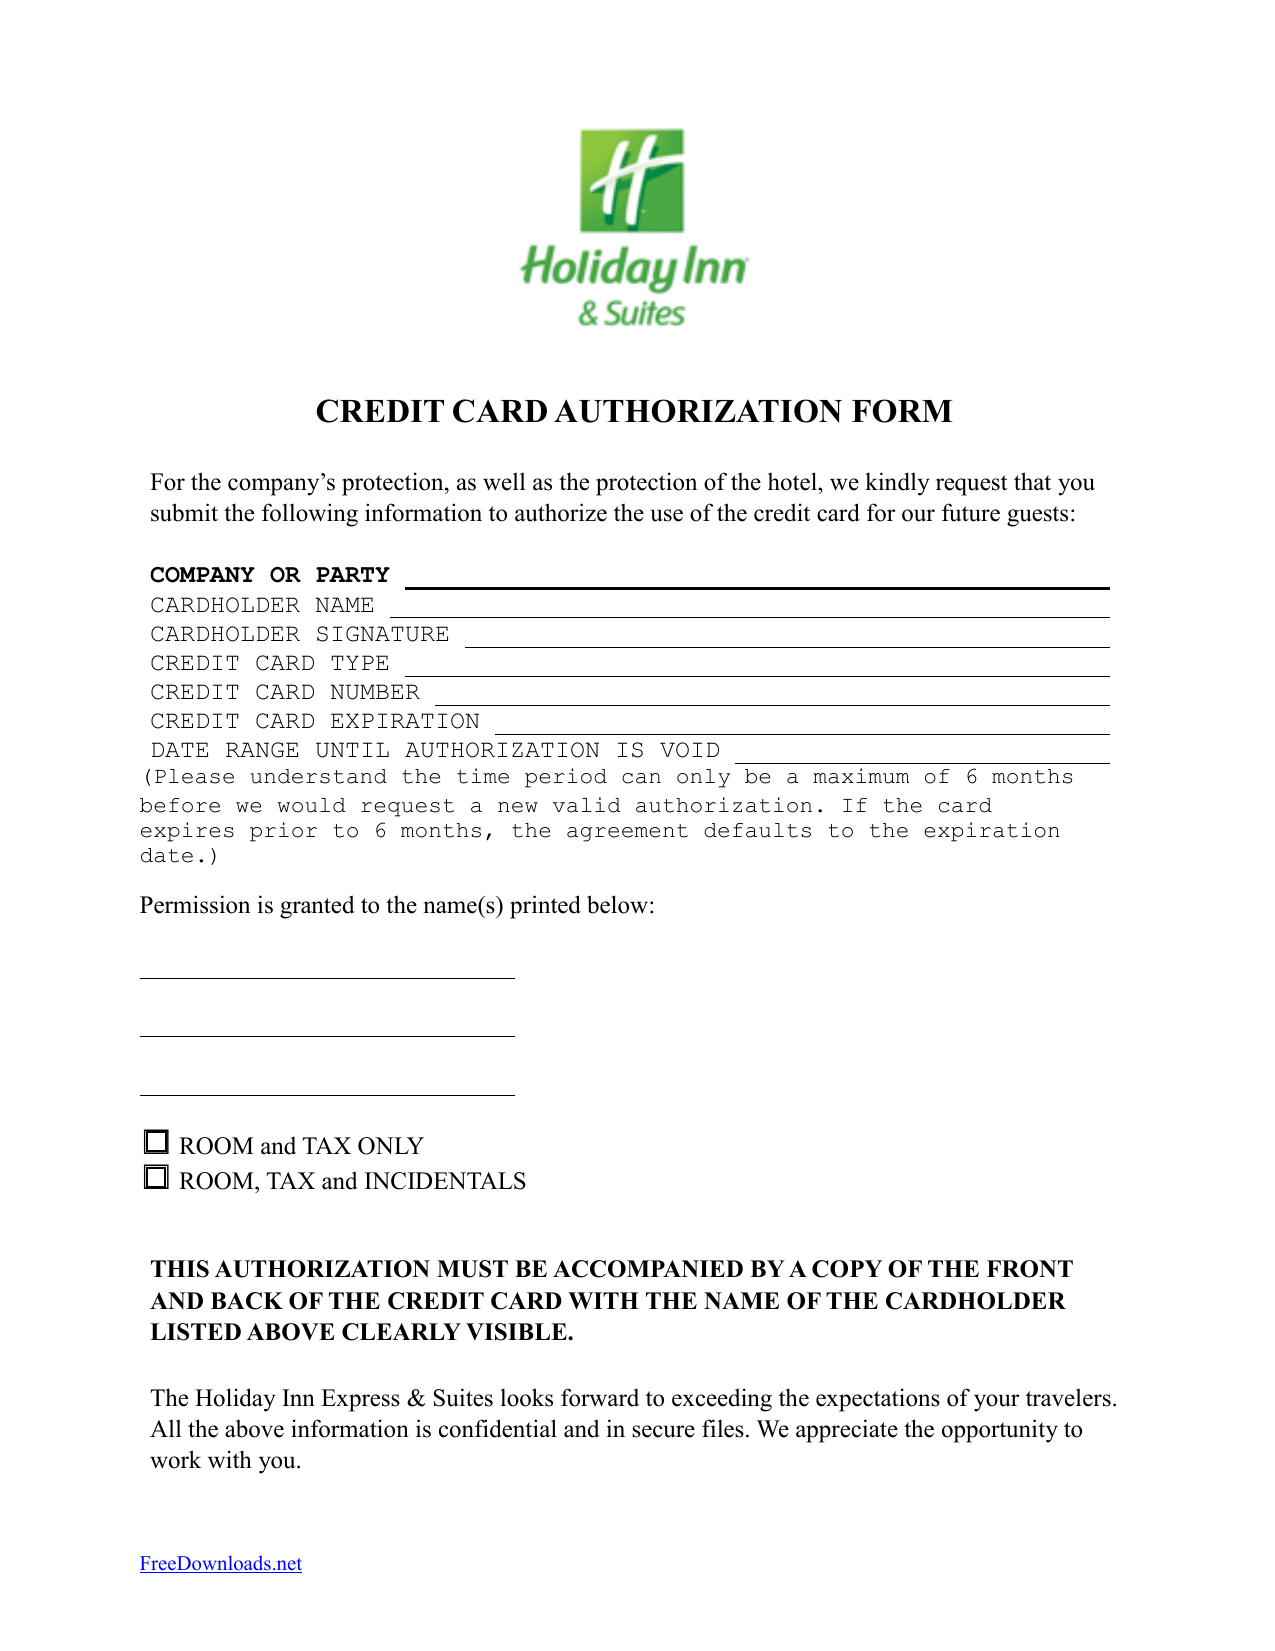 Download Holiday Inn Credit Card Authorization Form Template Intended For Hotel Credit Card Authorization Form Template